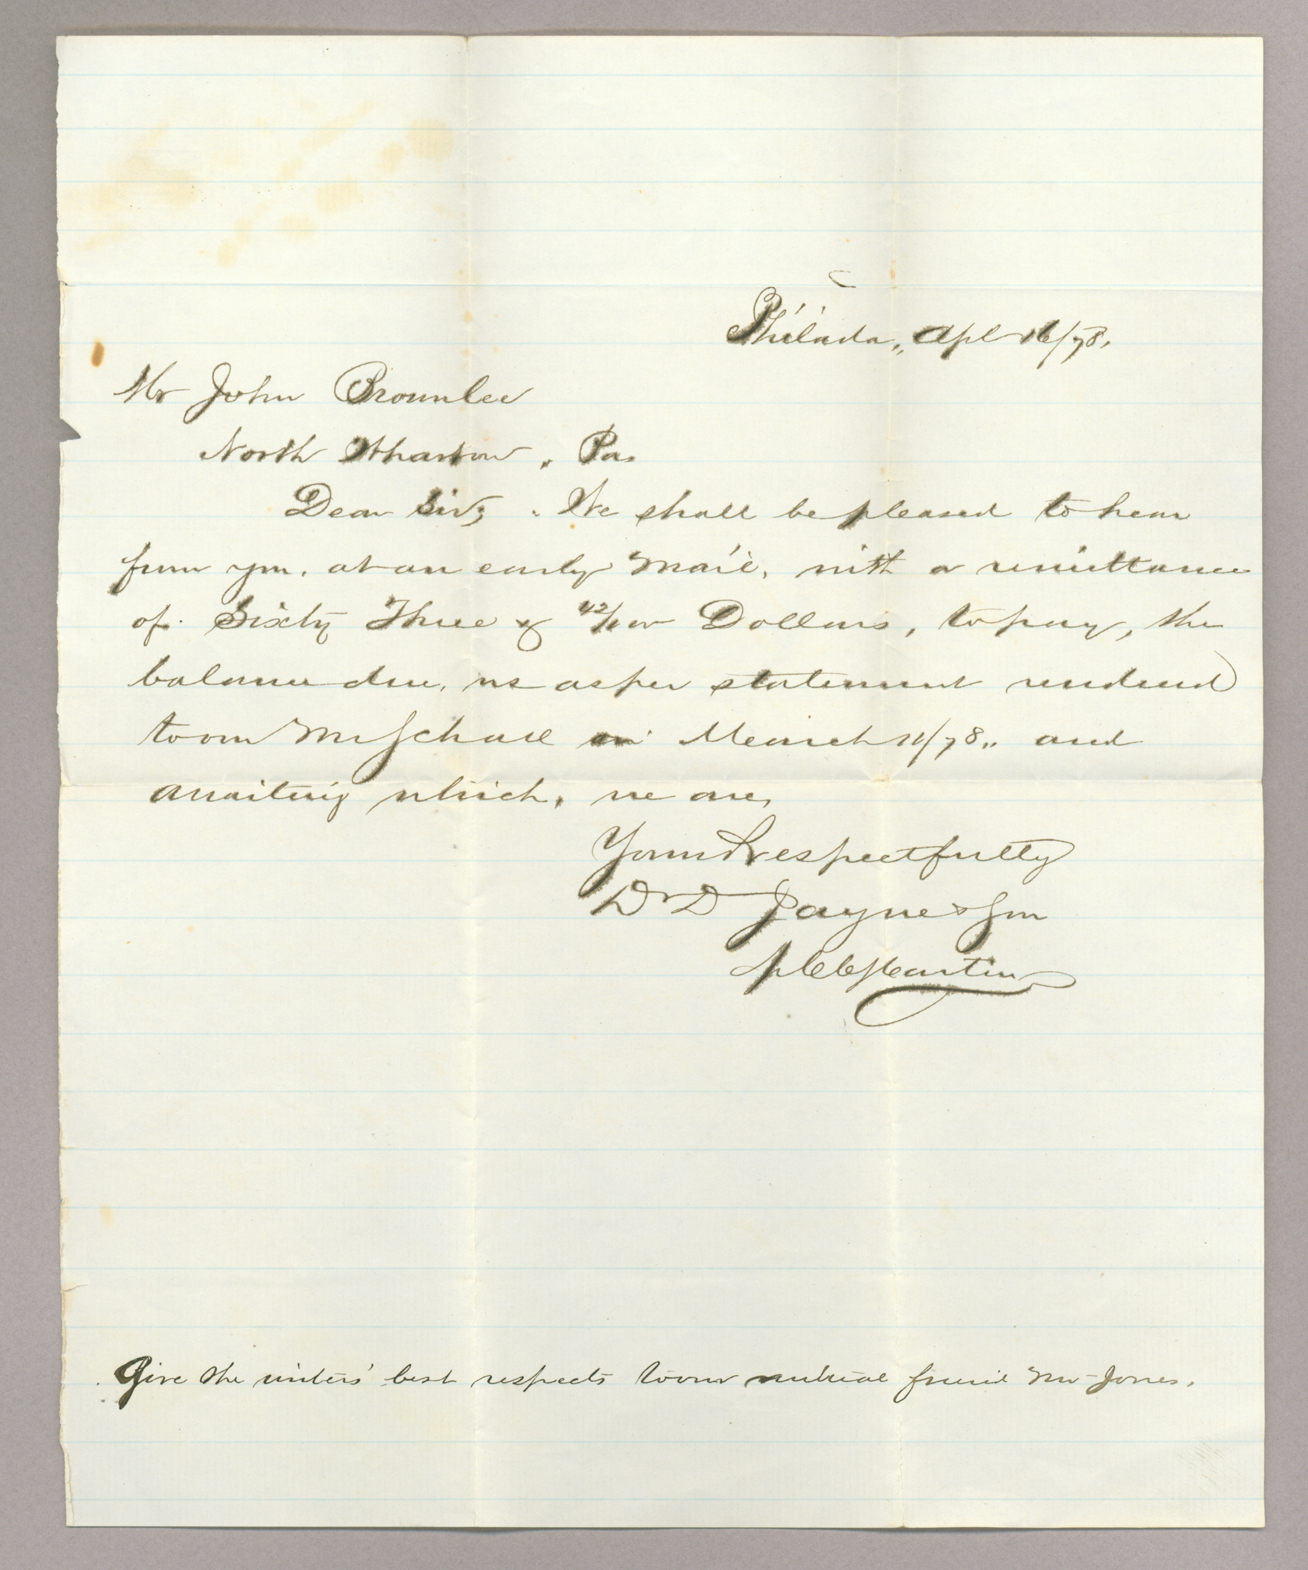 Papers pertaining to John E. Brownlee's account with Dr. D. Jayne & Son, Philadelphia, Pennsylvania, Letter